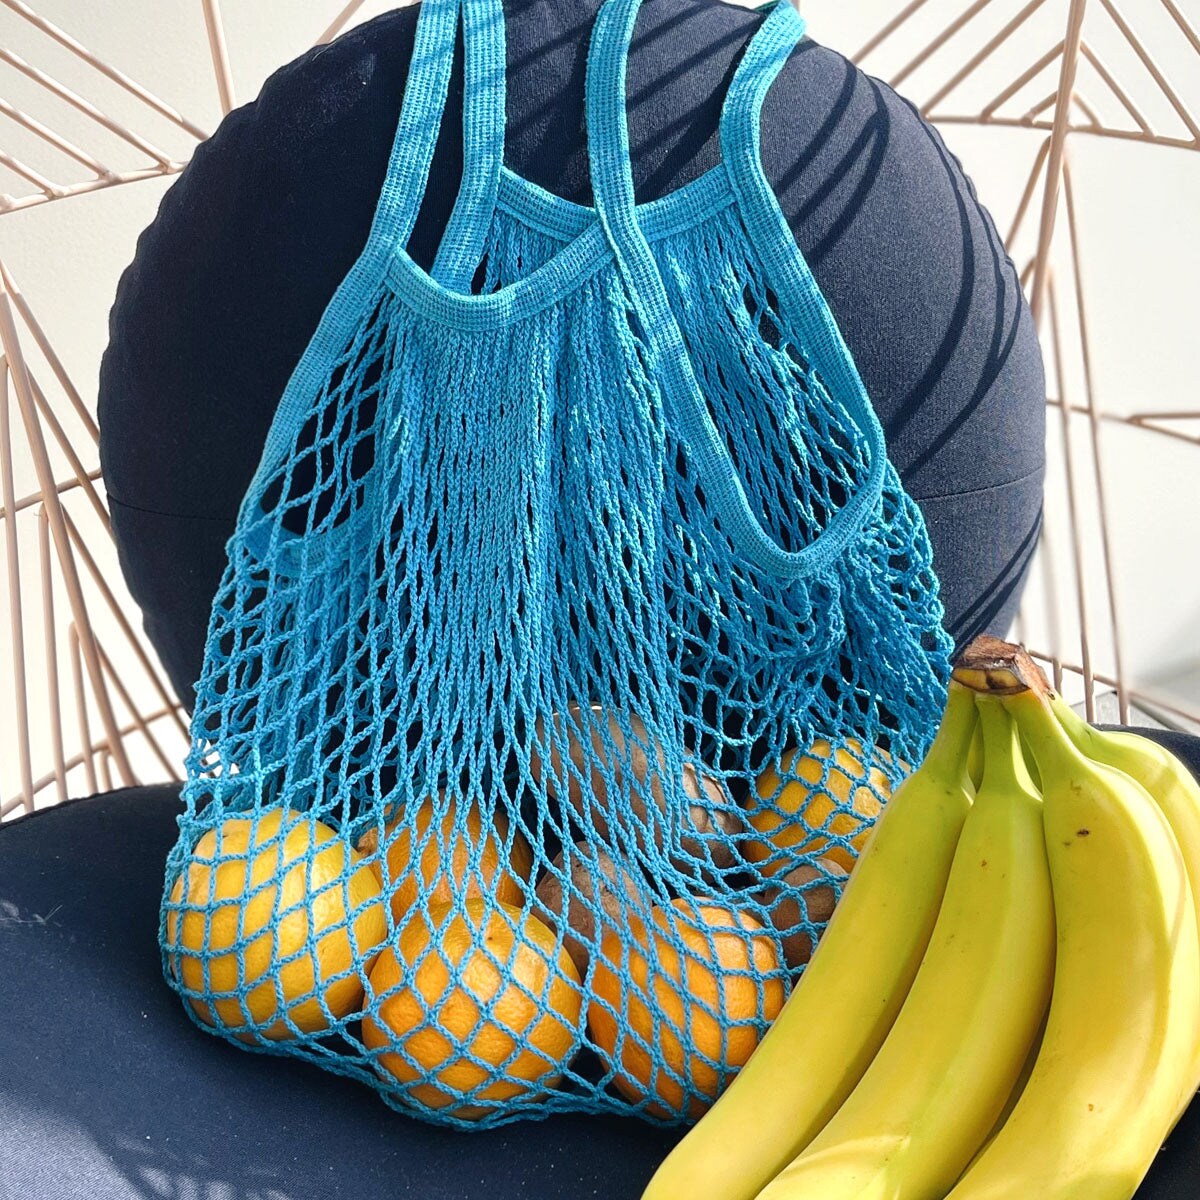 Wrapables Cotton Mesh Net Shopping Bag, Grocery Bag for Vegetables, Produce (Set of 3), Yellow, Blue, Hot Pink